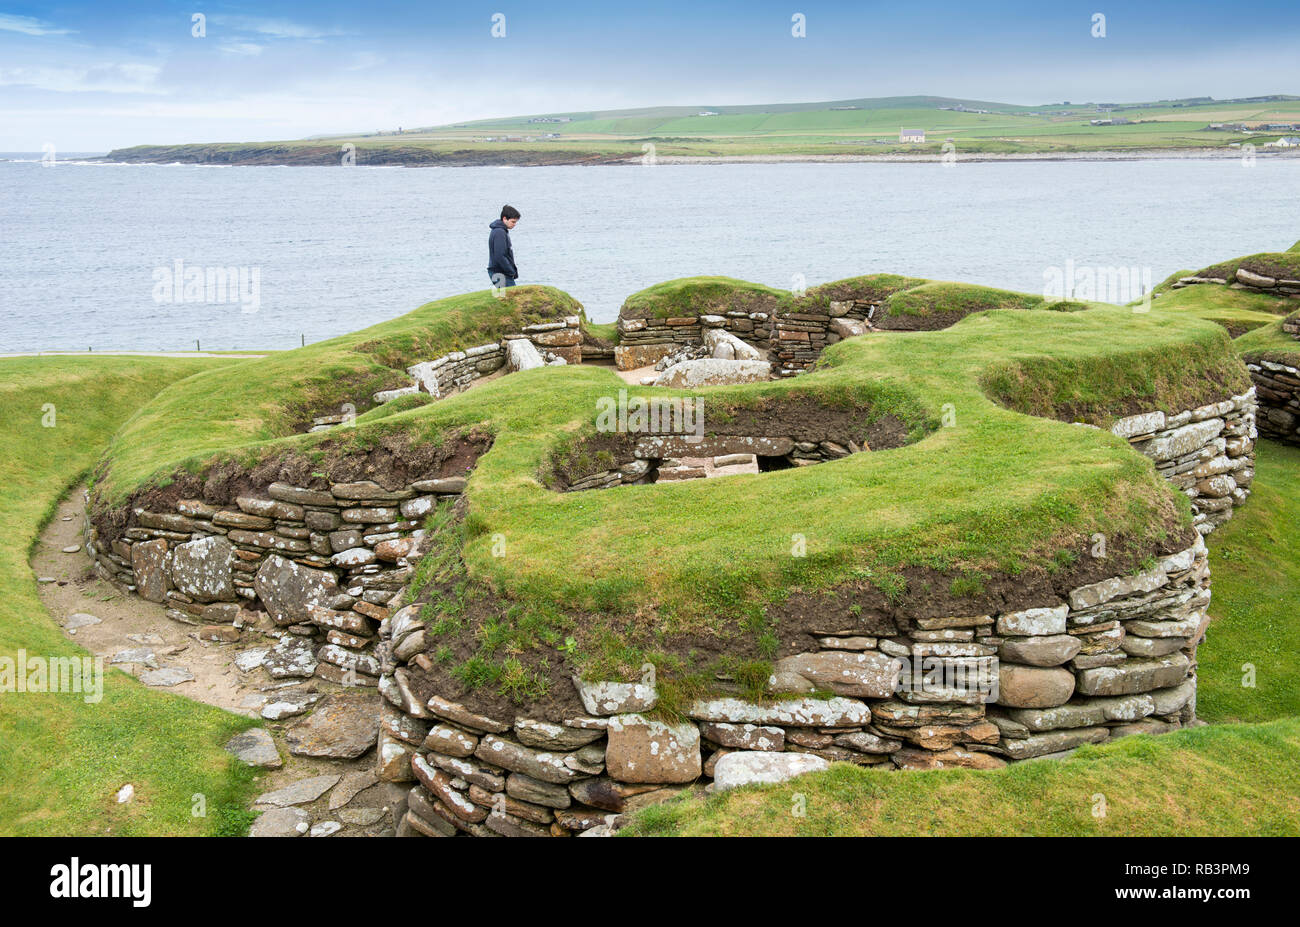 Tourists at Skara Brae, a stone-built Neolithic village located on the Bay of Skaill on the west coast of the Orkney Islands in Scotland. Stock Photo